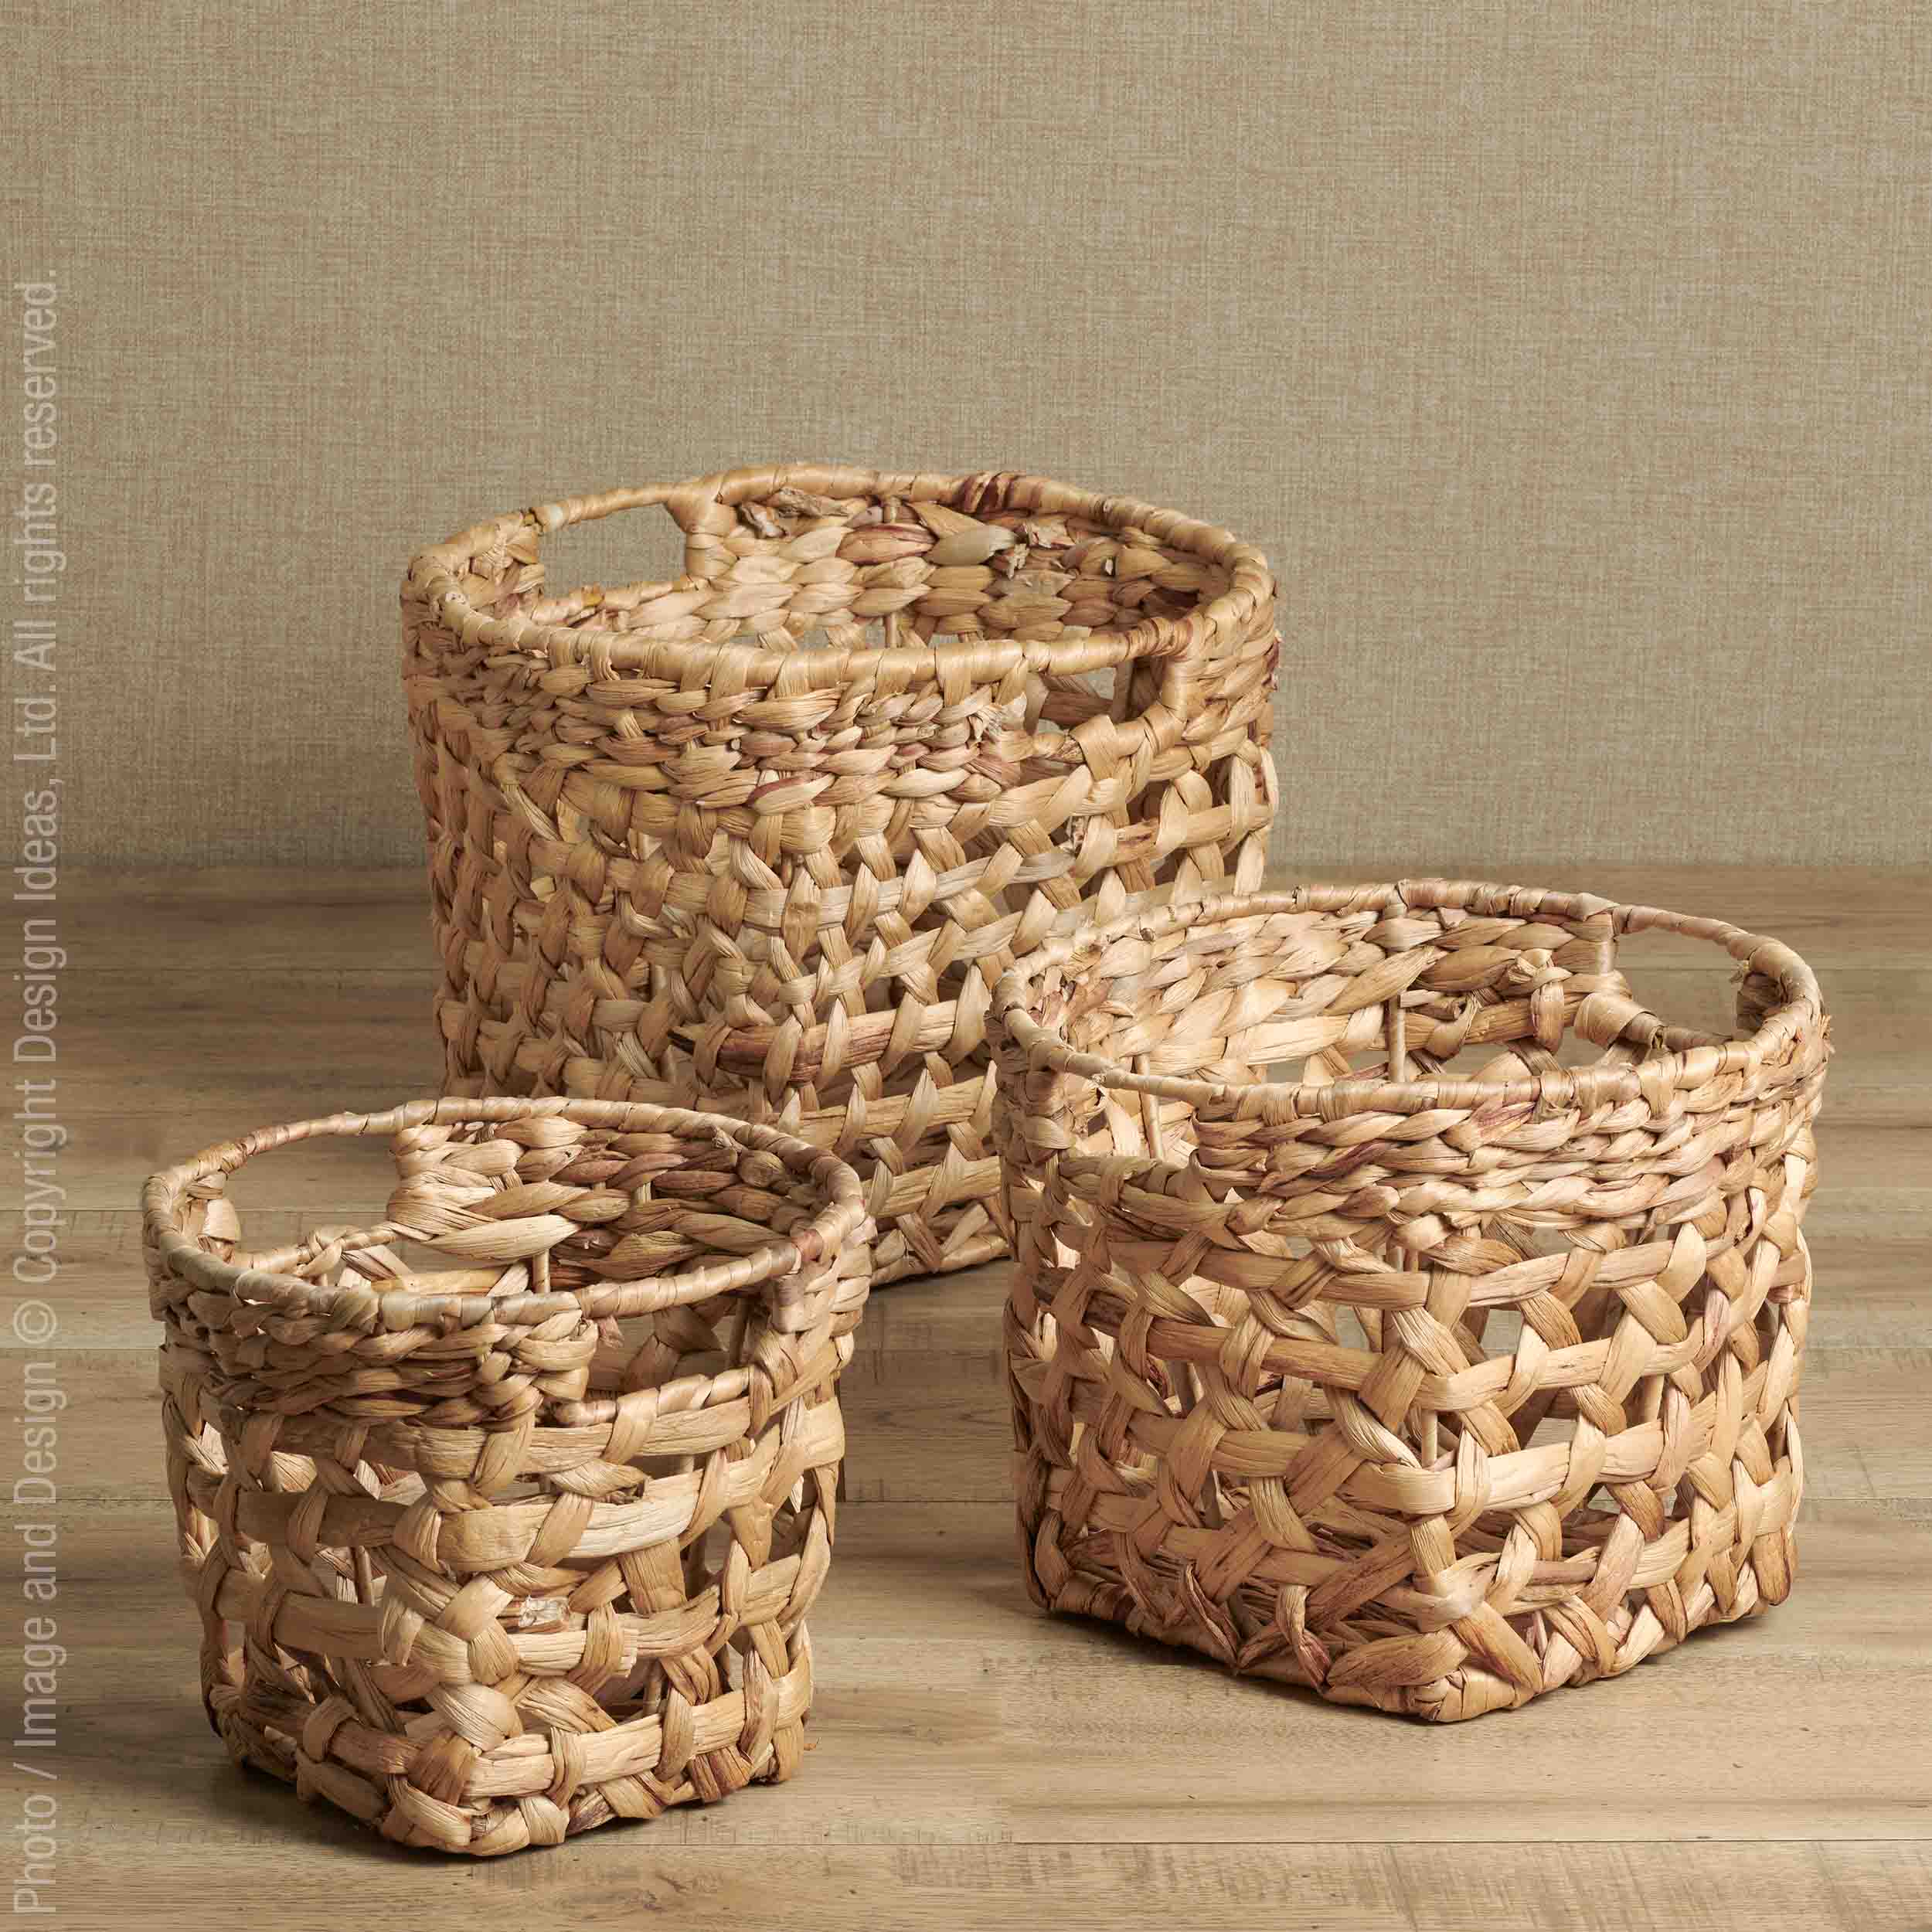 Trania™ baskets - Natural | Image 1 | Premium Basket from the Trania collection | made with Water Hyacinth Twine for long lasting use | texxture